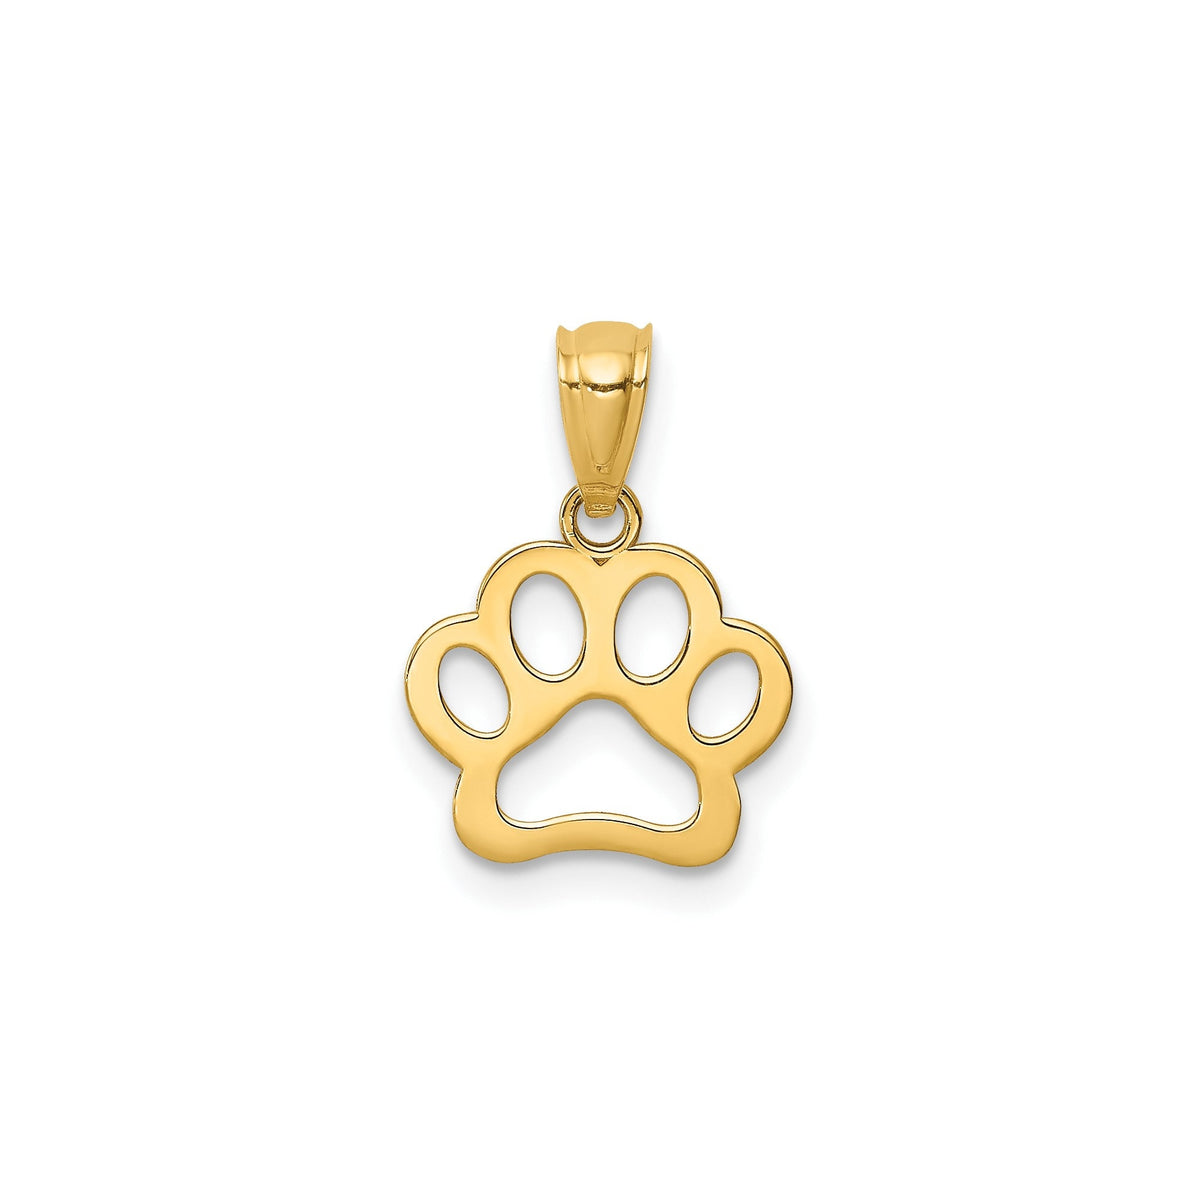 Solid 14K Yellow Gold Dog Paw Pendant Small Size - Gift Box Included